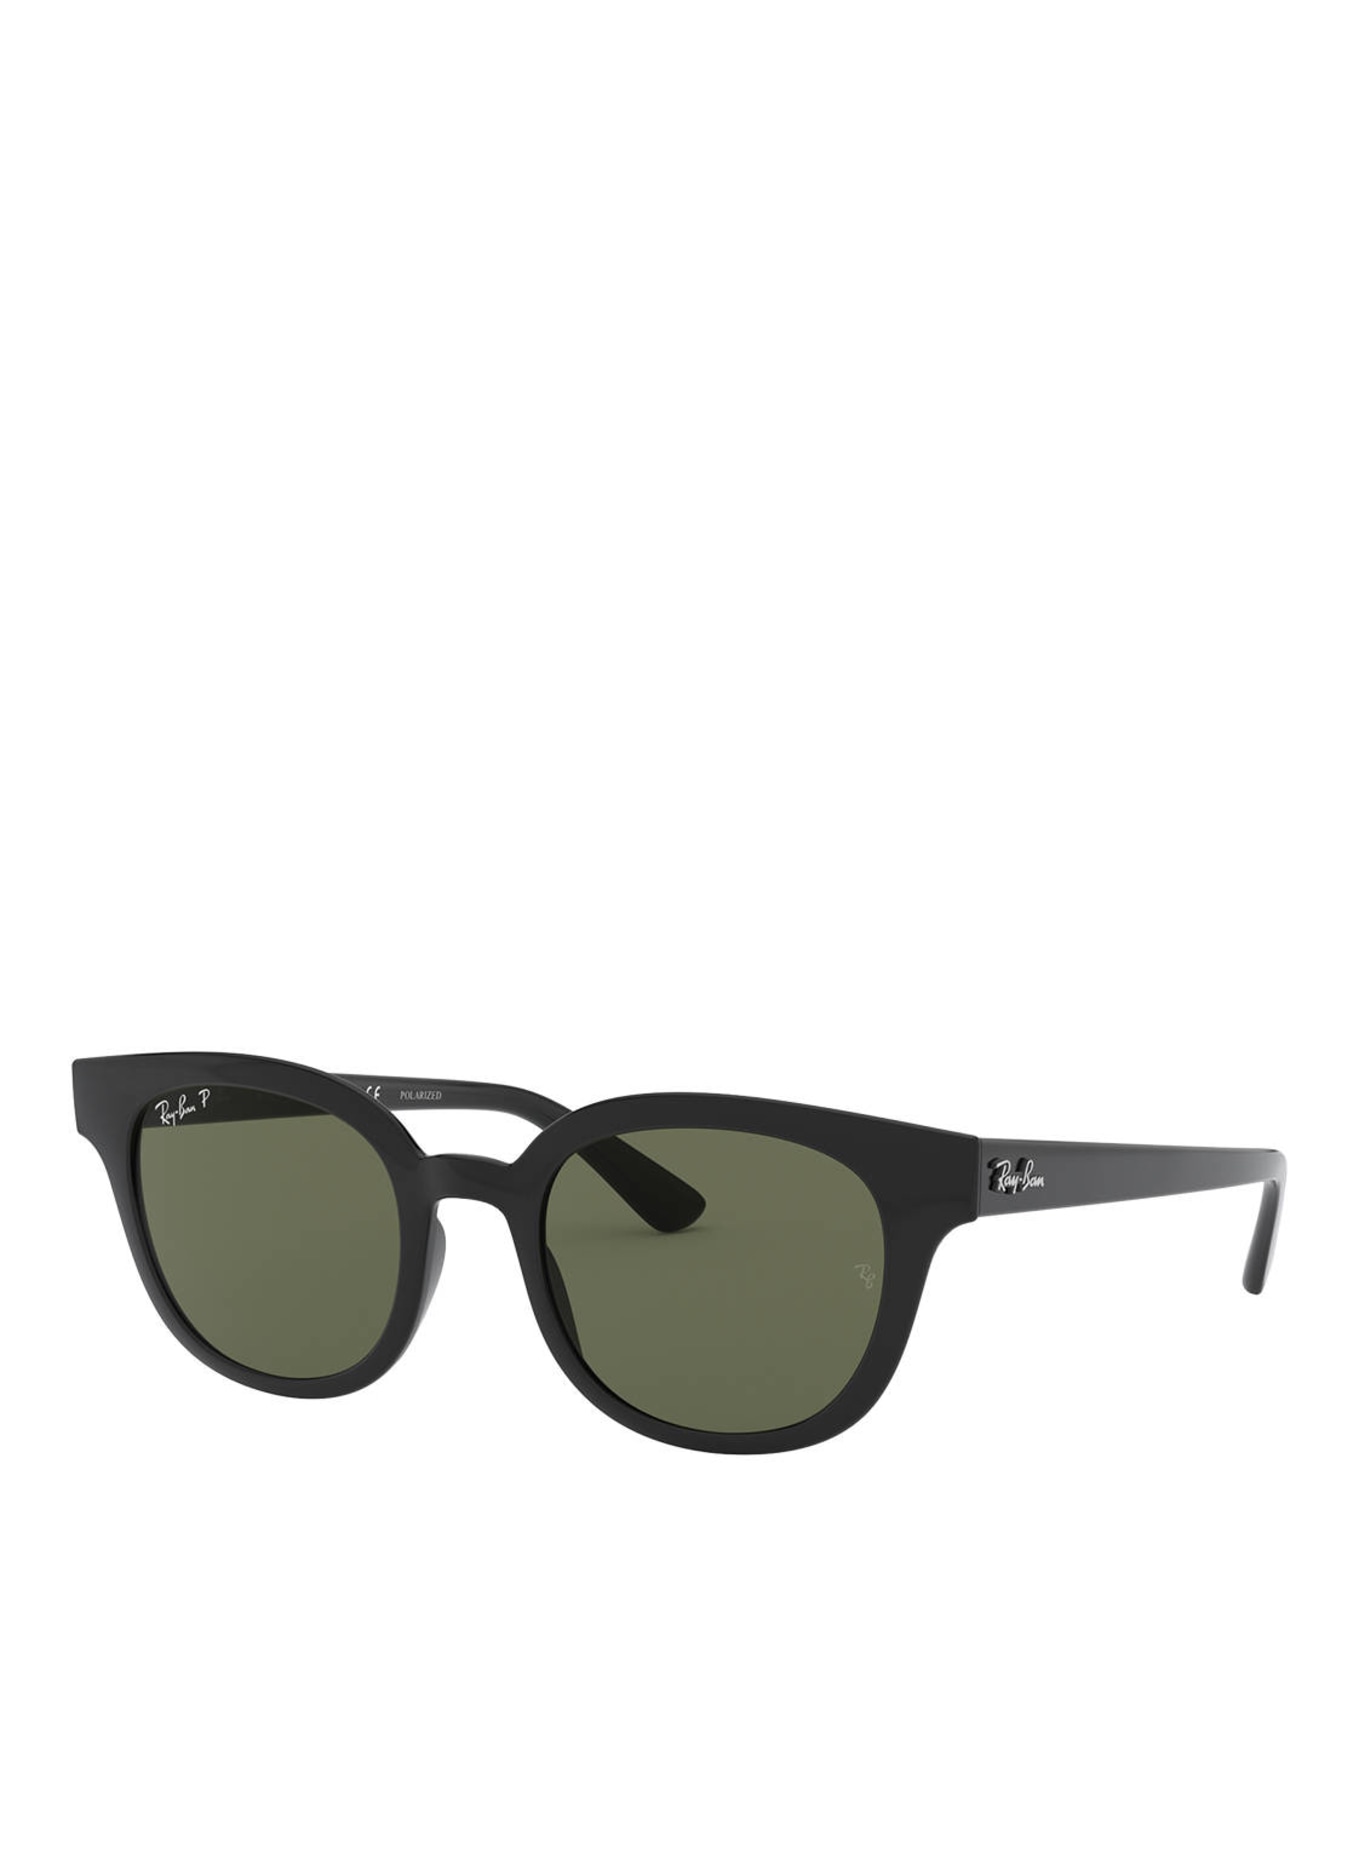 Ray-Ban Sunglasses RB4324, Color: 601/9A - BLACK/GREEN POLARIZED (Image 1)